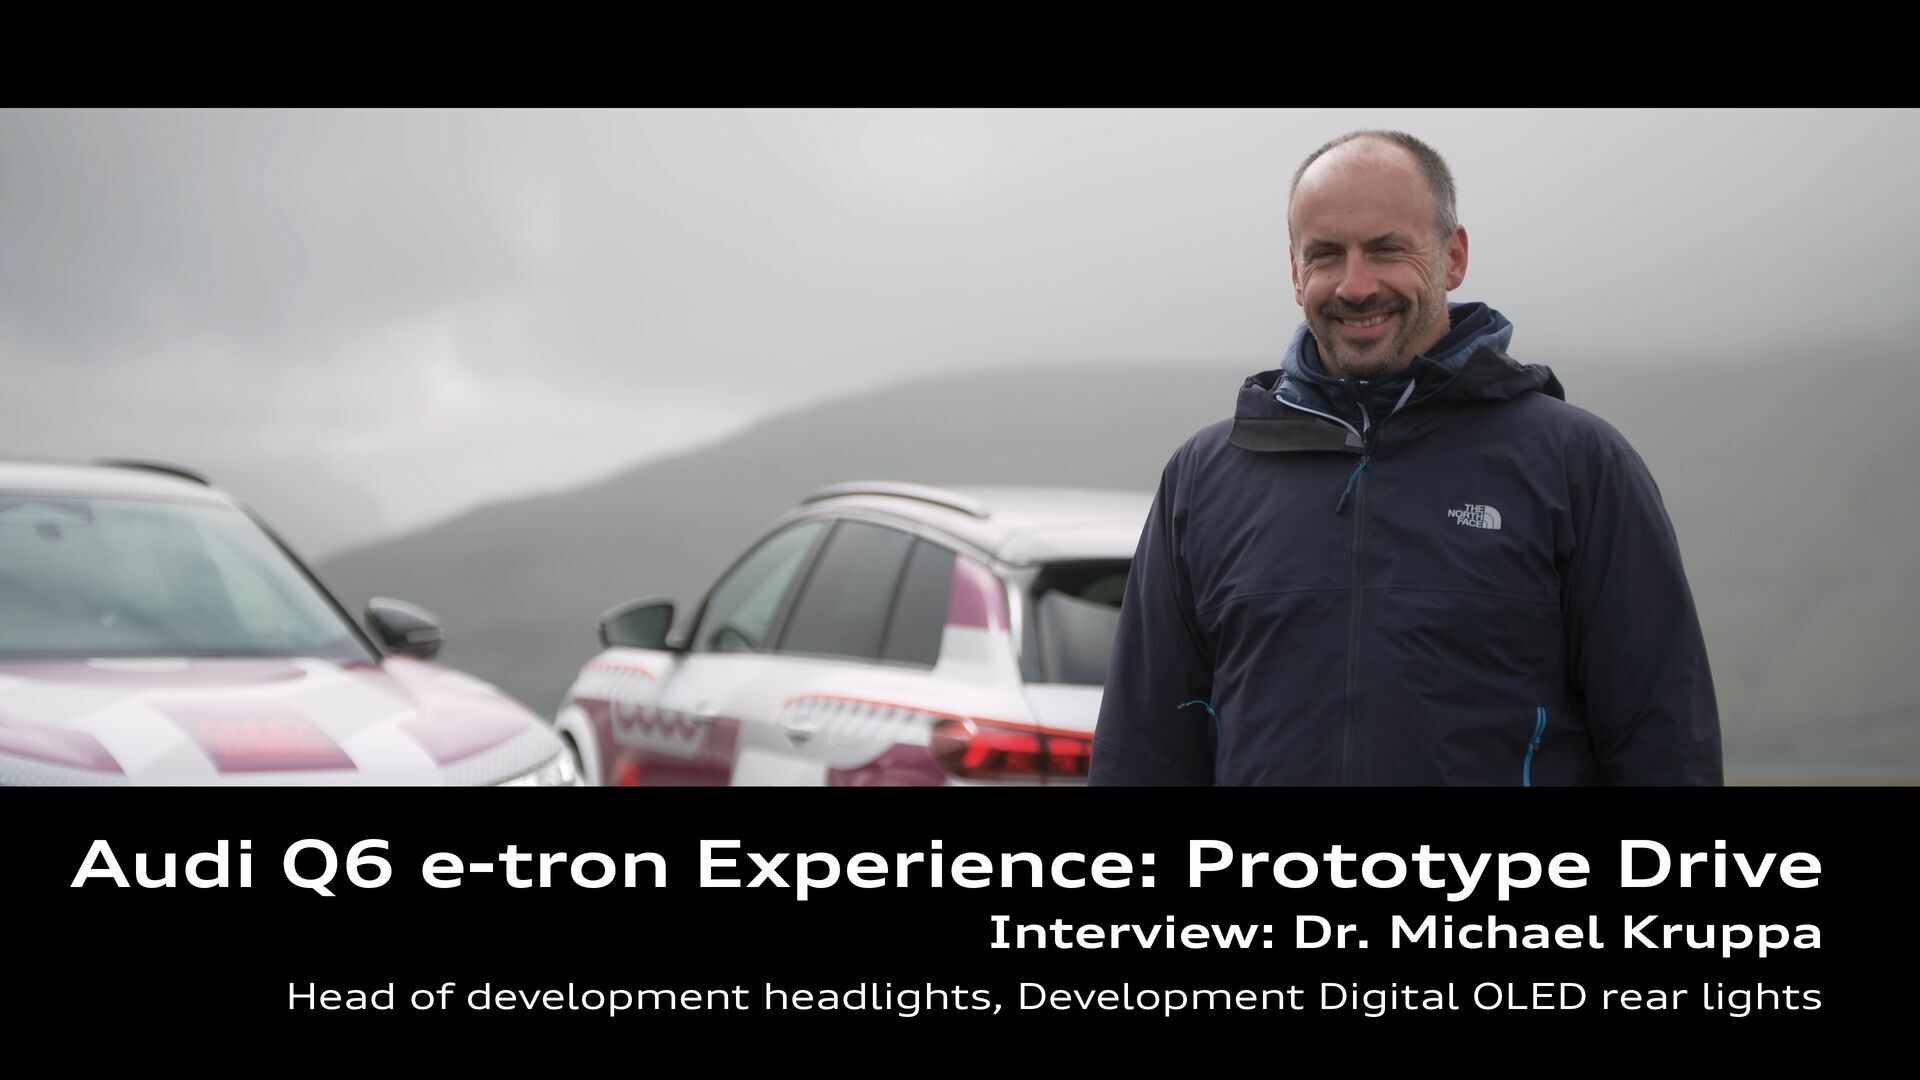 Footage: Audi Q6 e-tron Experience – Interview with Dr. Michael Kruppa